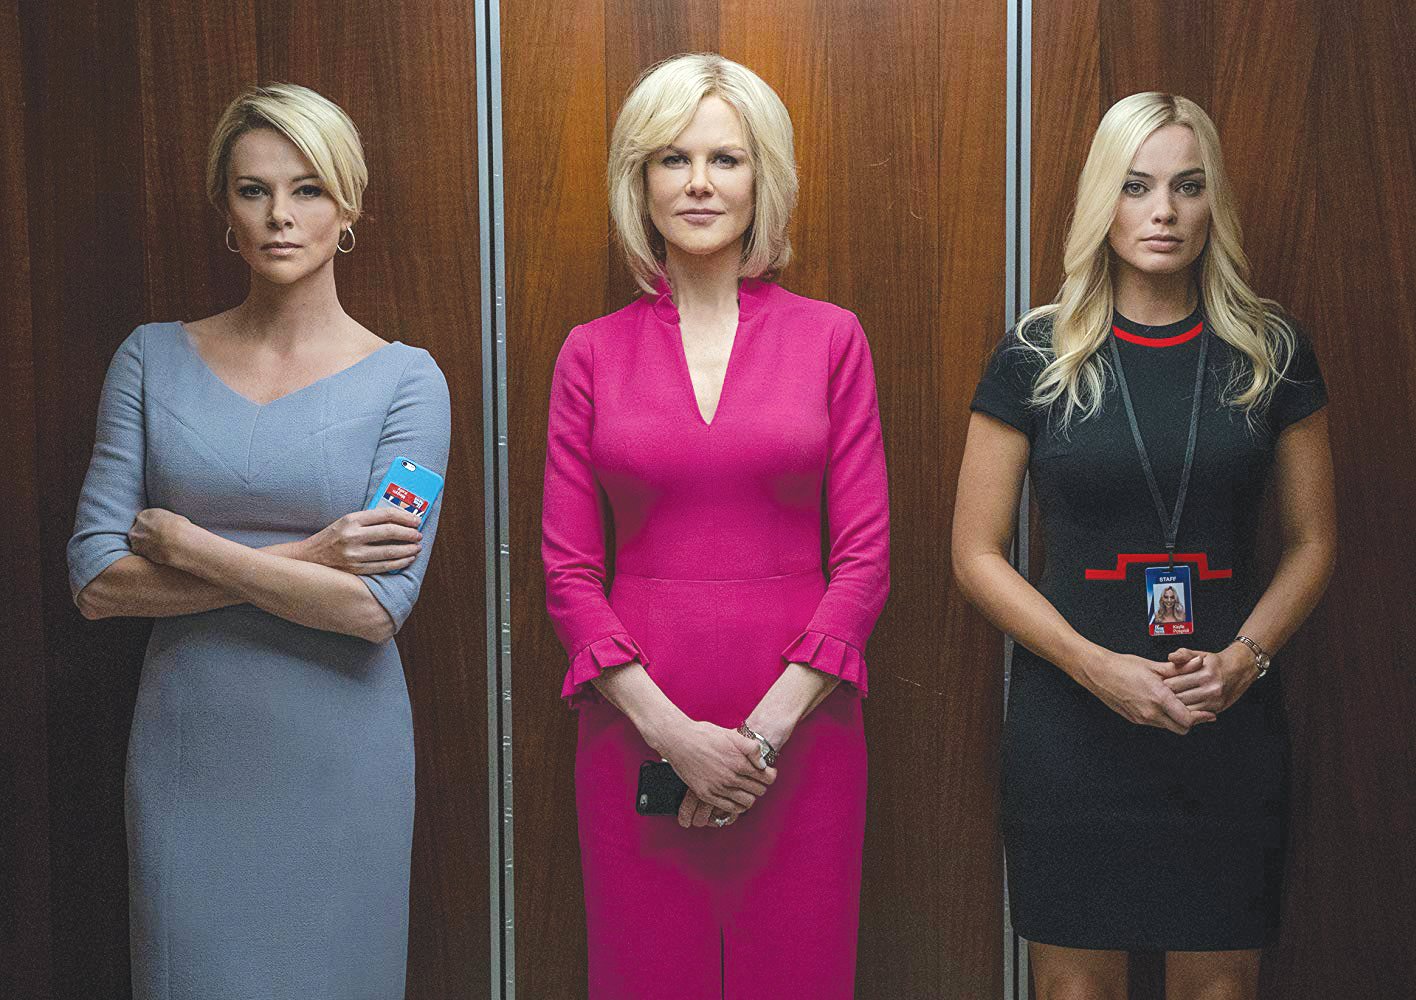 From left, Charlize Theron, Nicole Kidman and Margot Robbie star in 'Bombshell,' a film depciting allegations of sexual misconduct made against Fox News founder Roger Ailes by female employees.